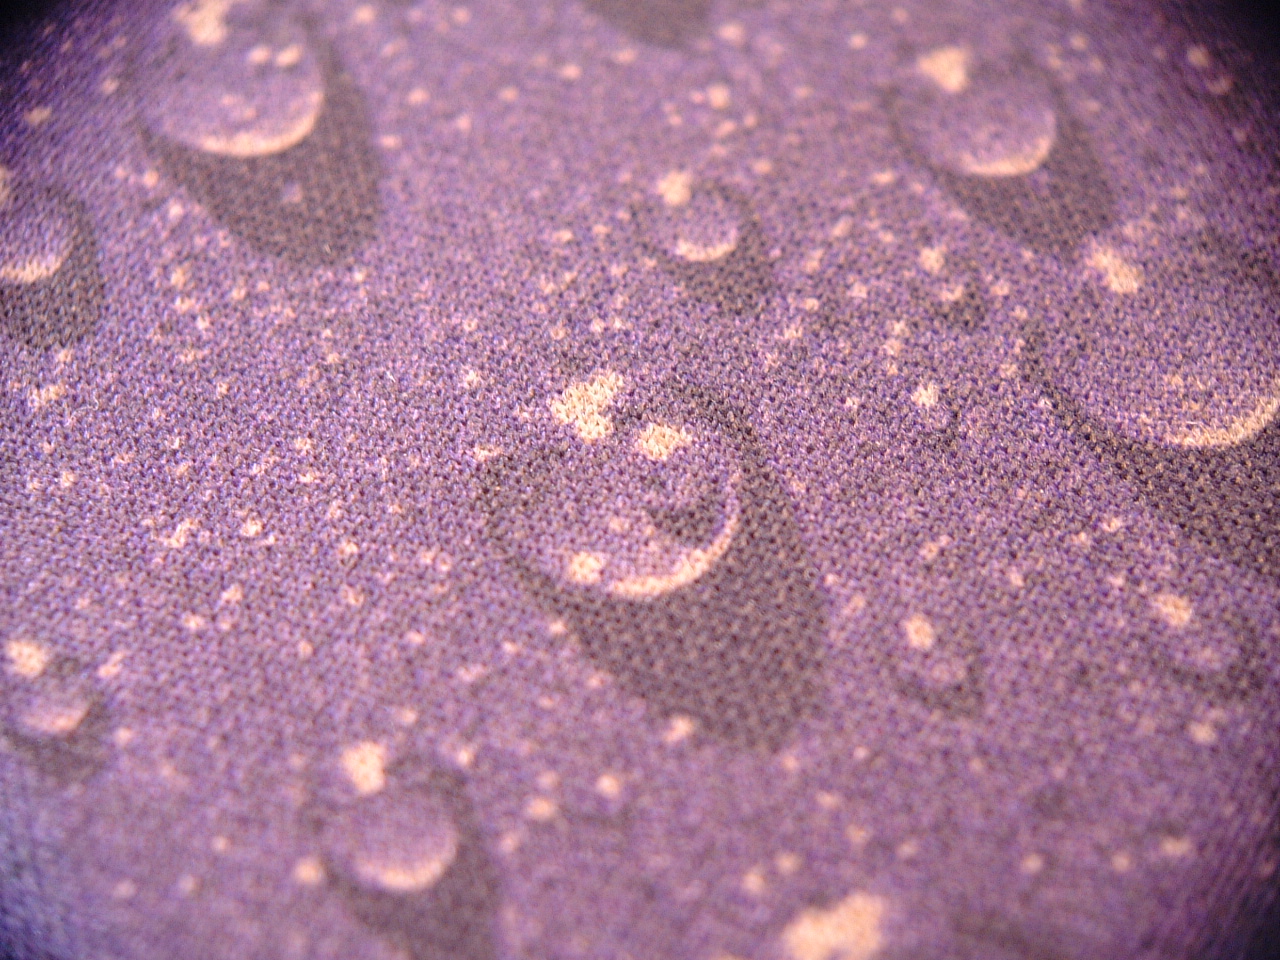 maartent fabric wil drops on it in print pink wet water